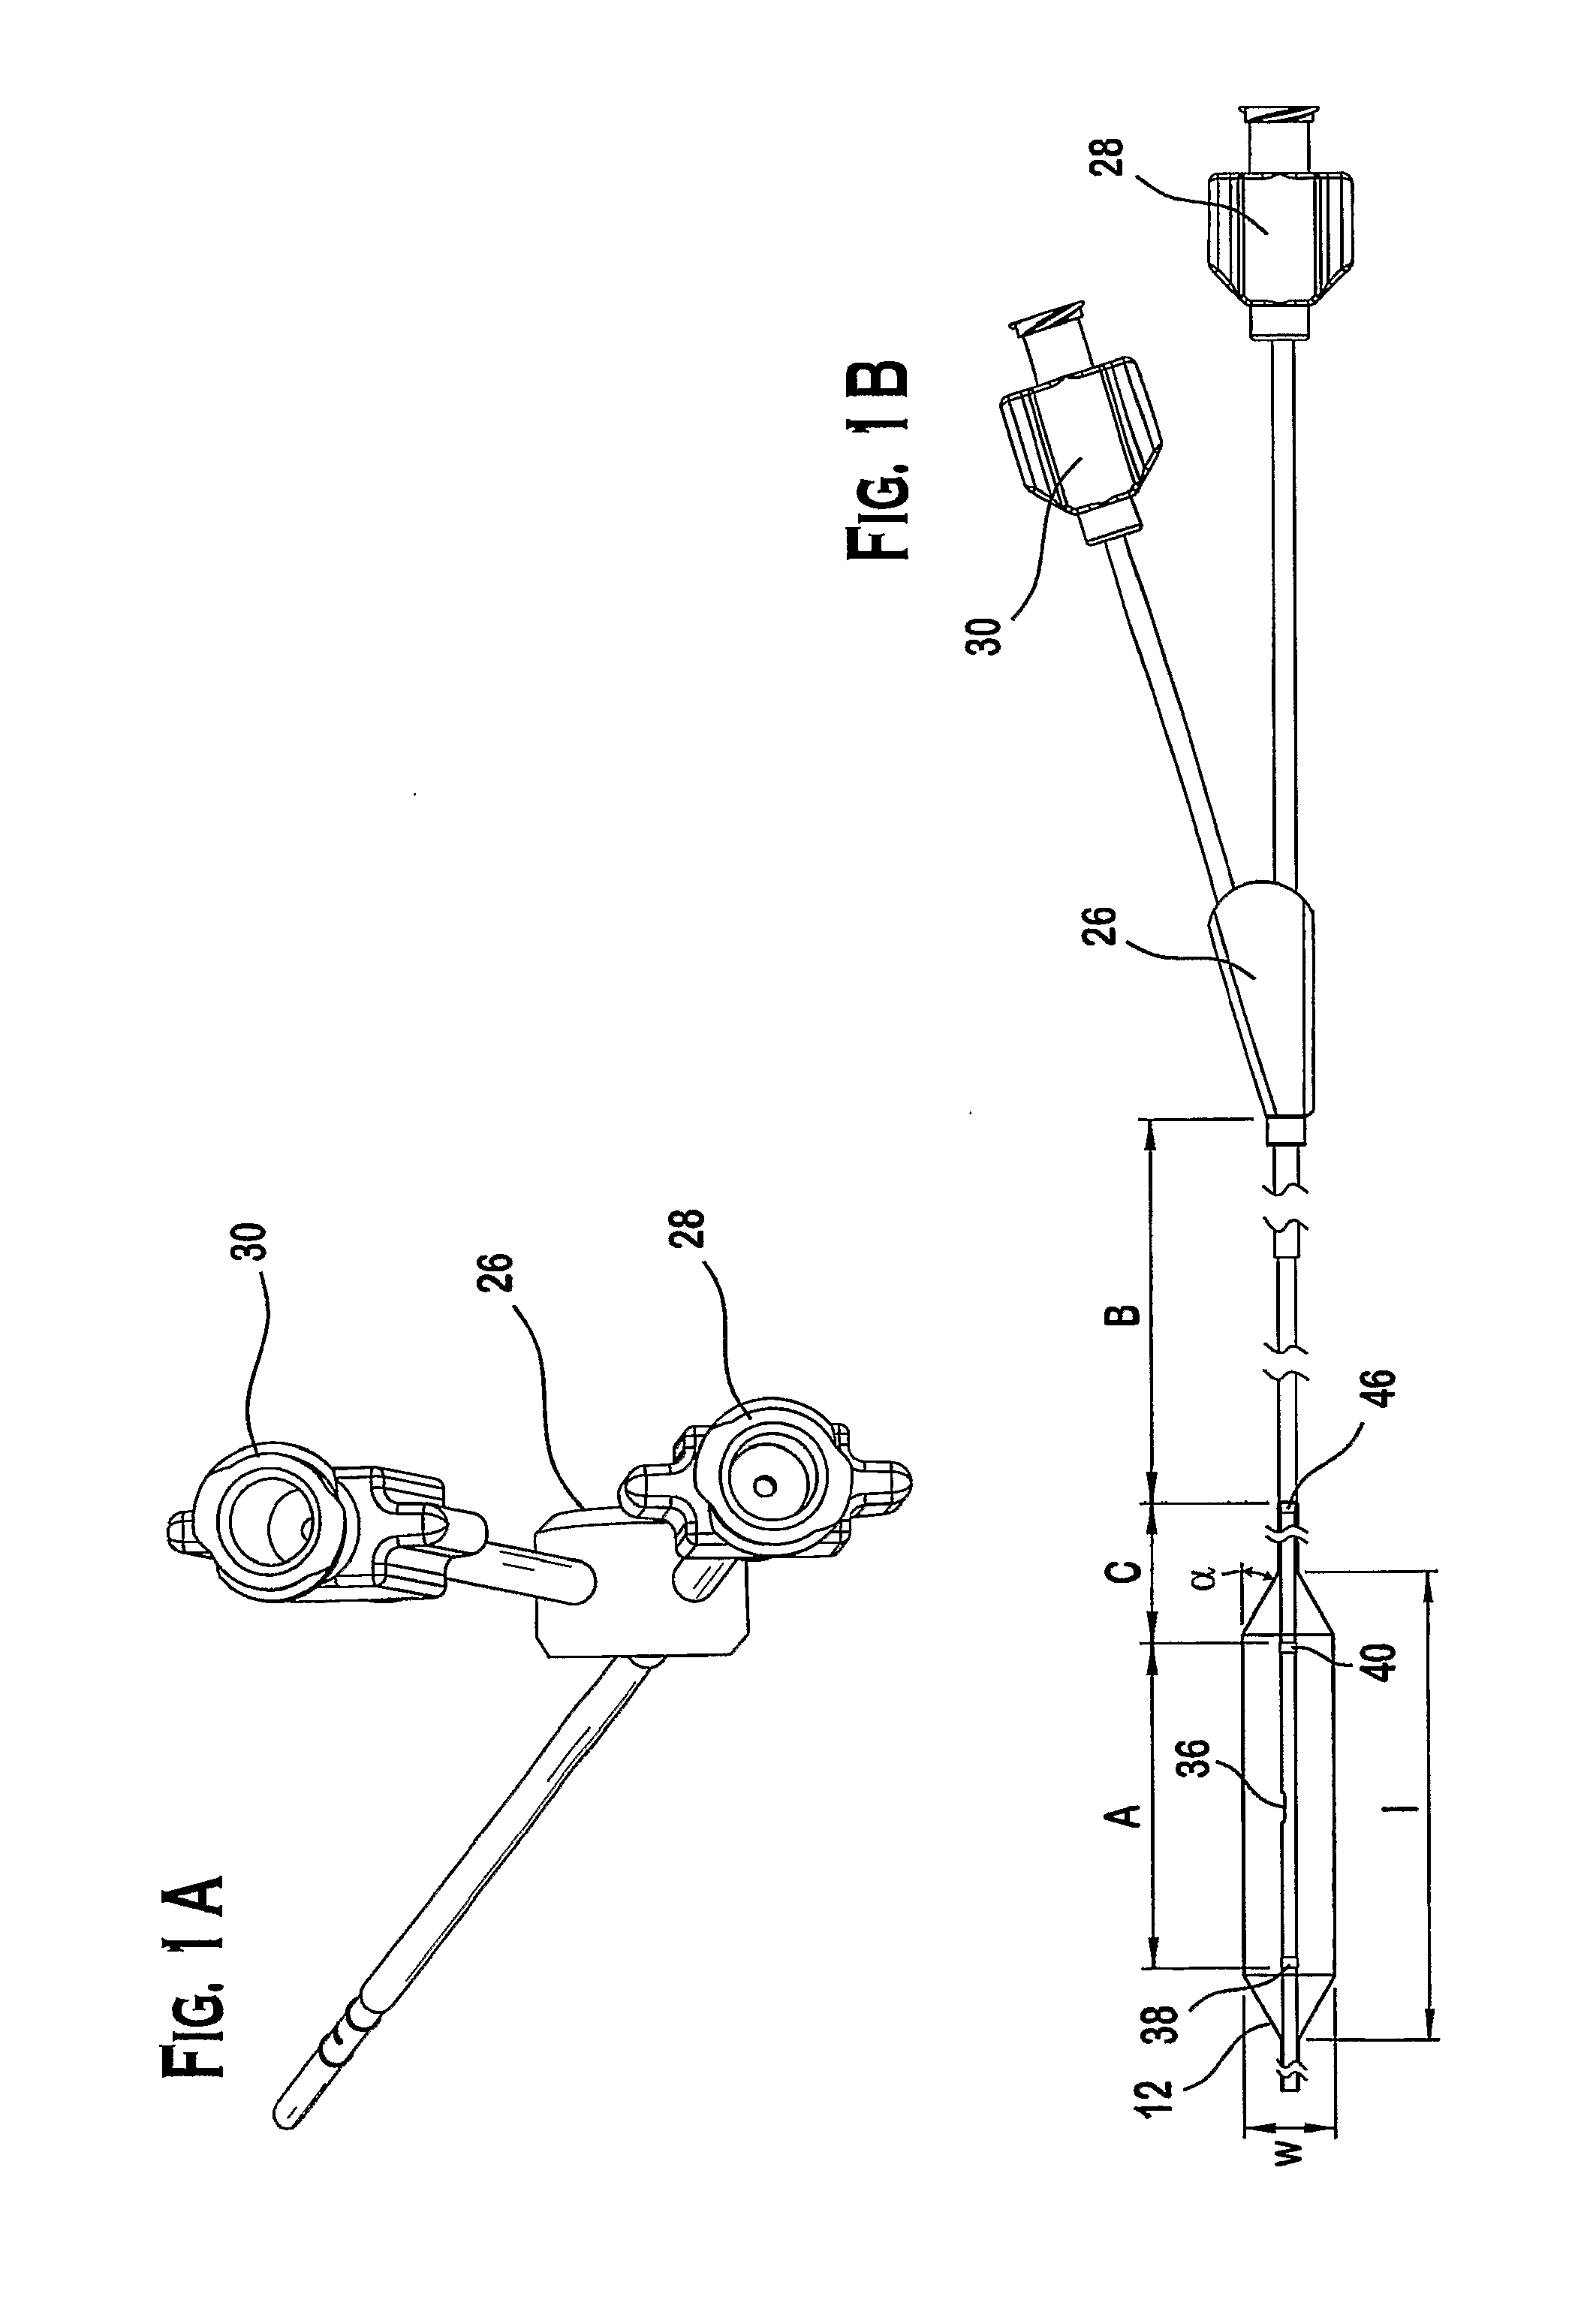 Balloon catheter with centralized vent hole